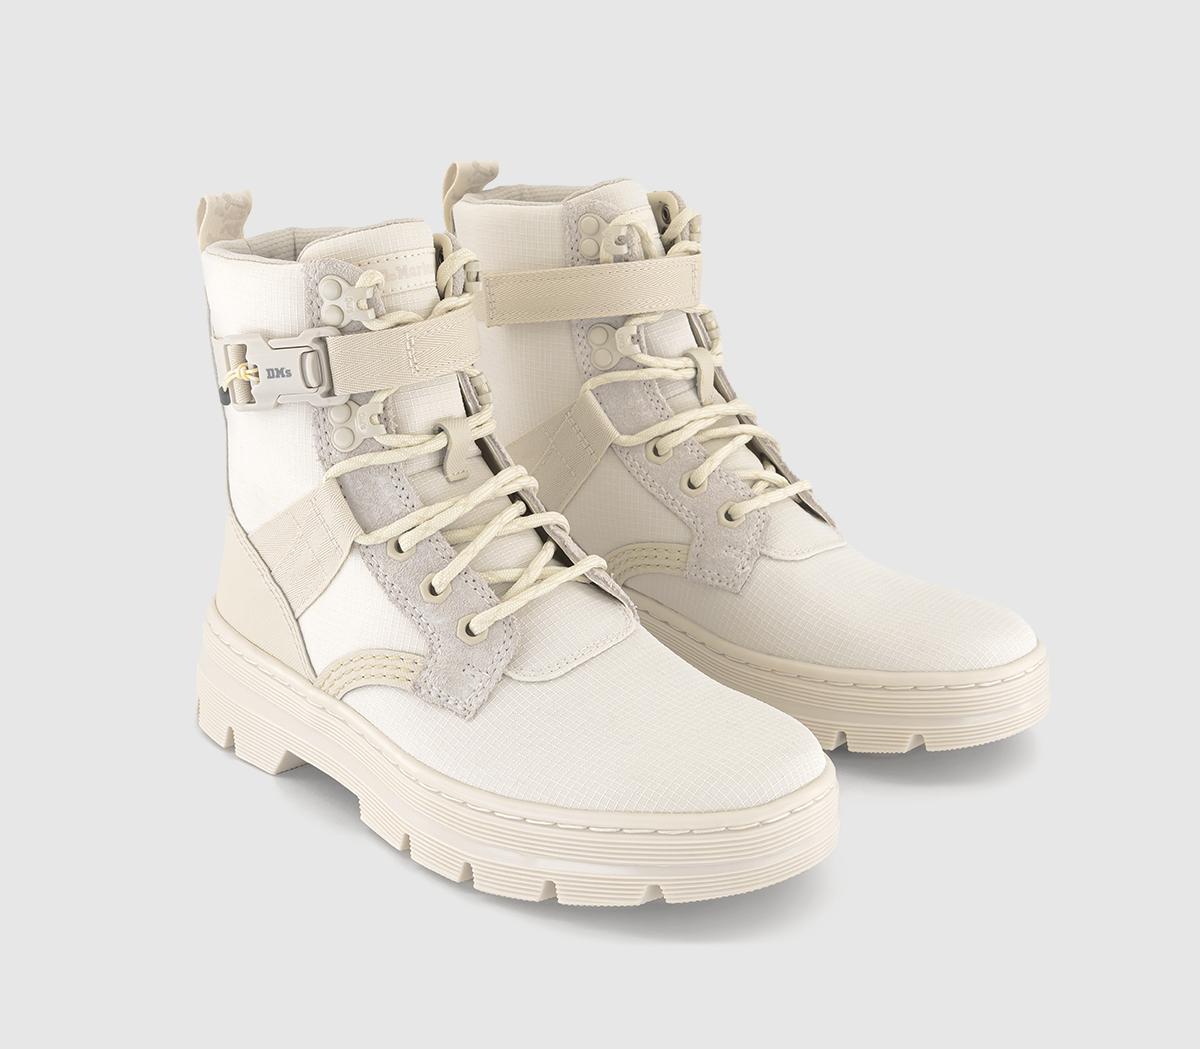 Dr. Martens Womens Combs Tech Ii Boots Off White Poly Ripstop, 7